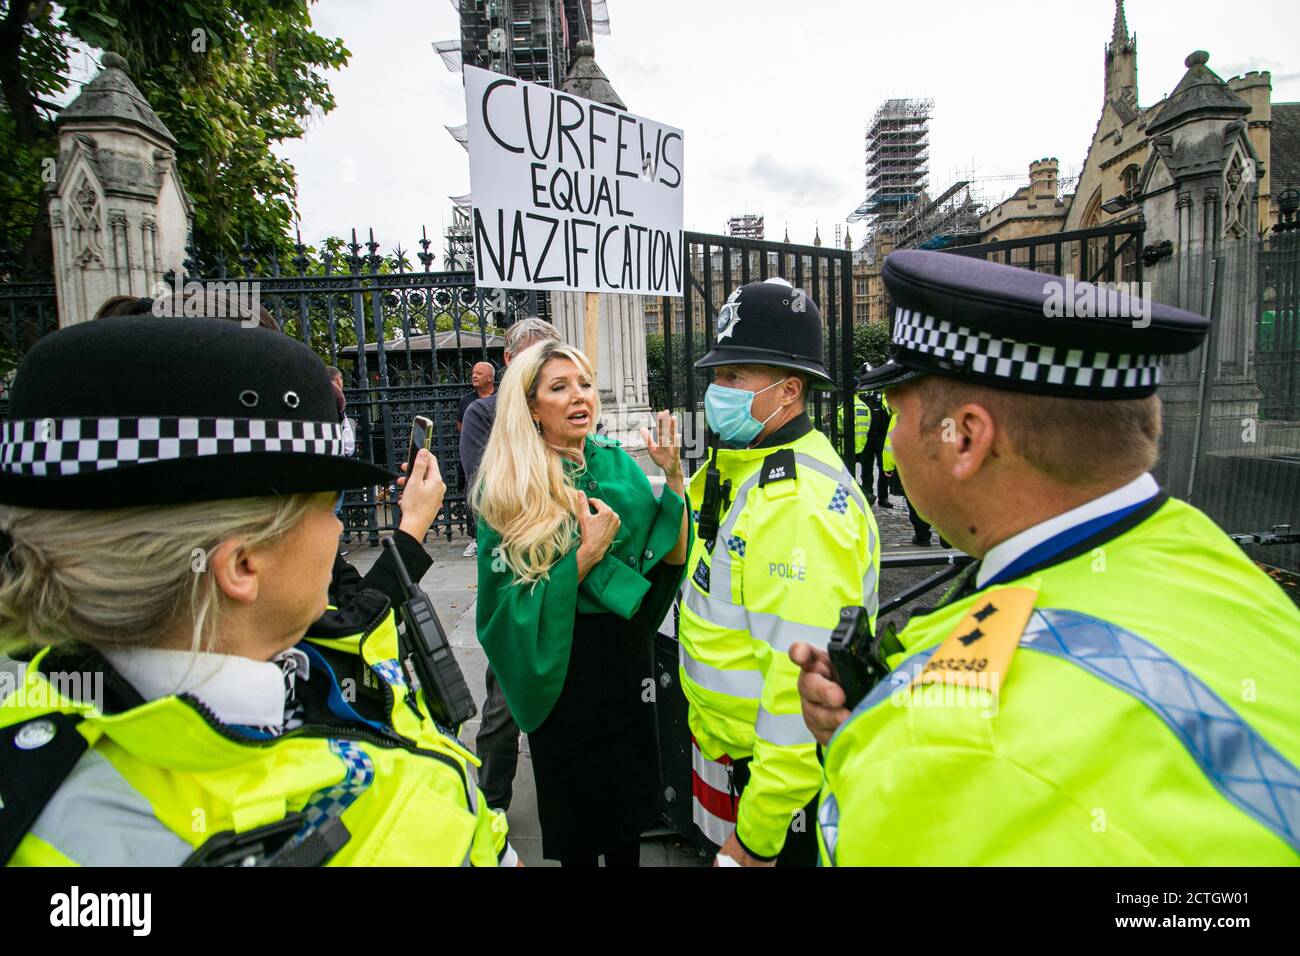 WESTMINSTER LONDON,UK 23 September 2020.  Anti- Vaxxer, Kate Shemirani protests outside Parliament after  Prime Minister Boris imposed new rules and curfews with  coronavirus restrictions on social interactions.  Kate Shemirani  believes there is no pandemic and Covid-19 is a hoax and a government conspiracy to control the masses and Covid vaccination is a political tool to change people's DNA. Credit: amer ghazzal/Alamy Live News Stock Photo